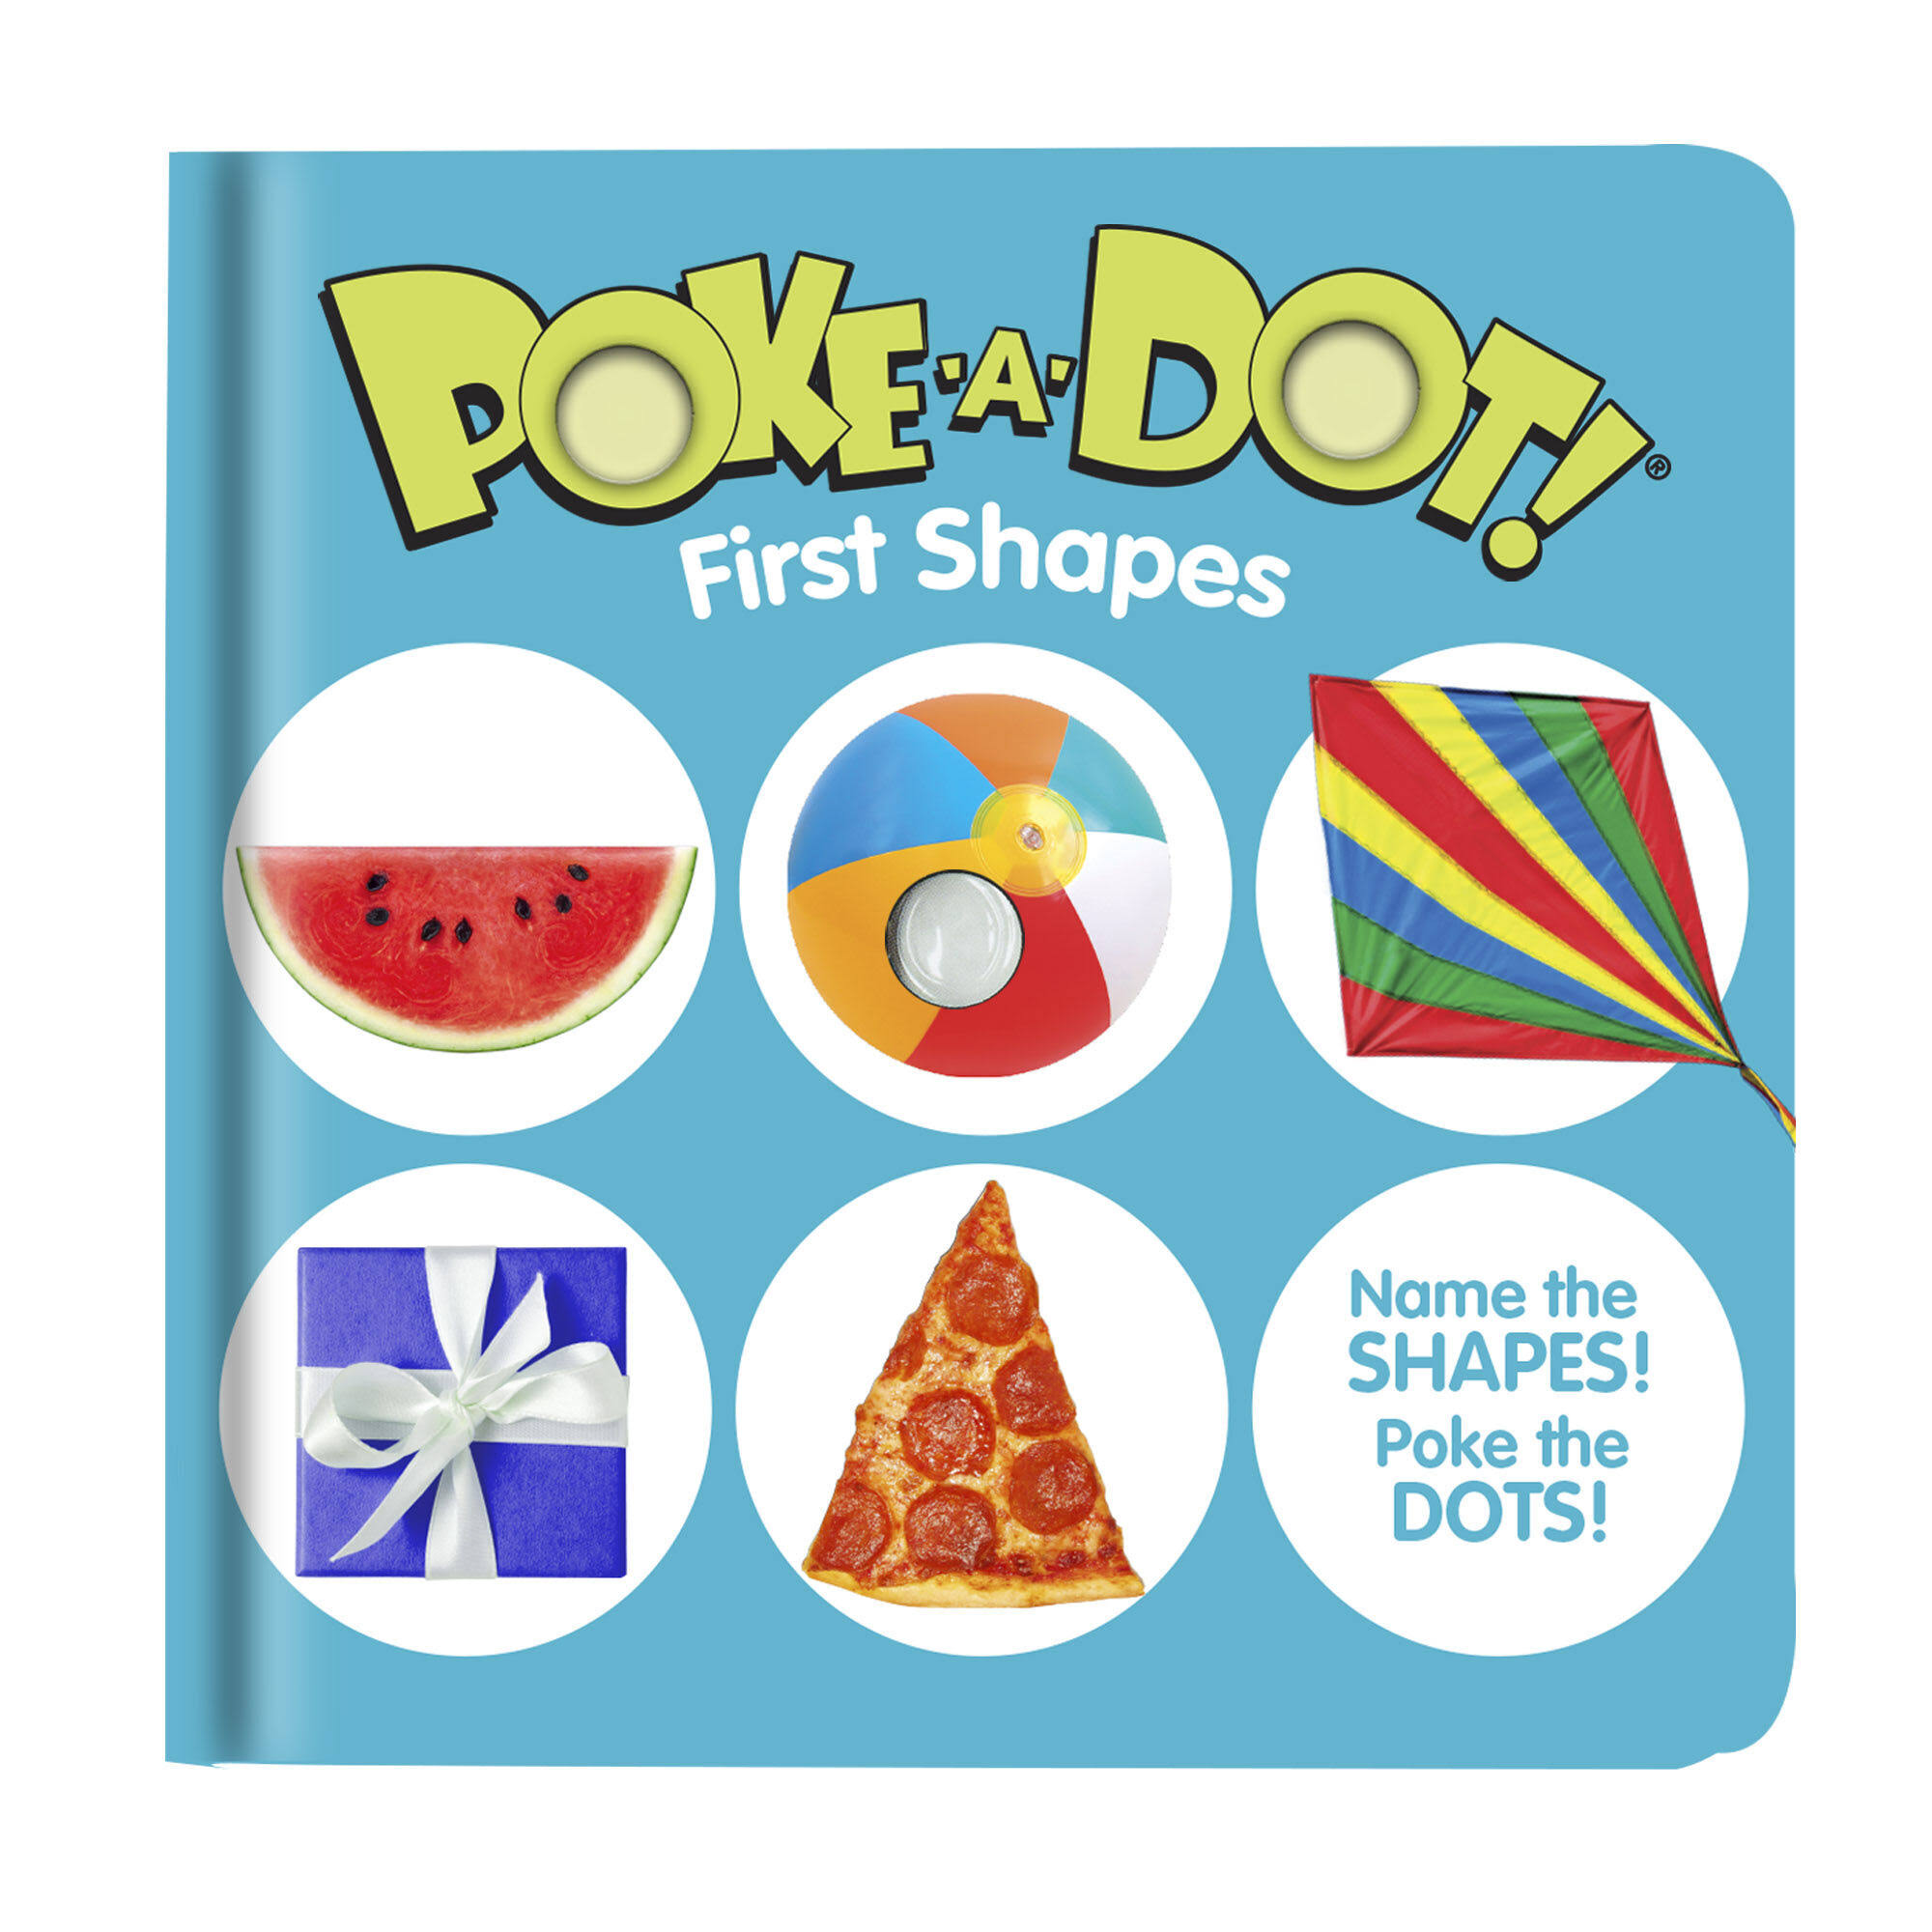 Poke-A-Dot: First Shapes (Board book)